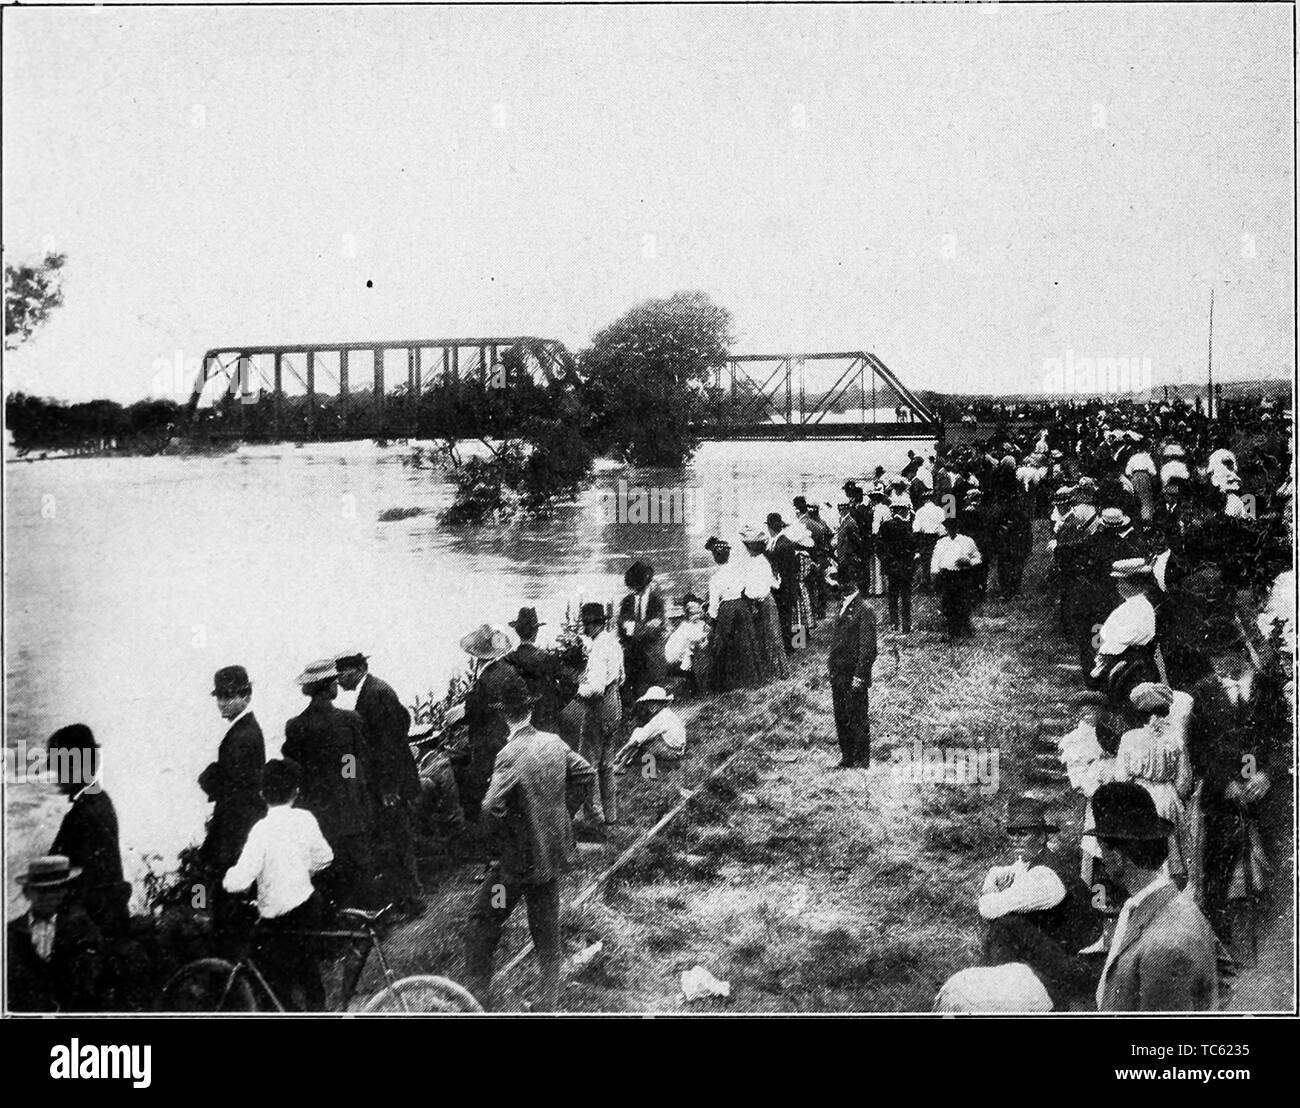 Photograph of a crowd of people gathered by the Trinity River at flood time, Dallas, Texas, from the book 'Book of Texas' by Harry Yandell Benedict and John A. Lomax, 1916. Courtesy Internet Archive. () Stock Photo